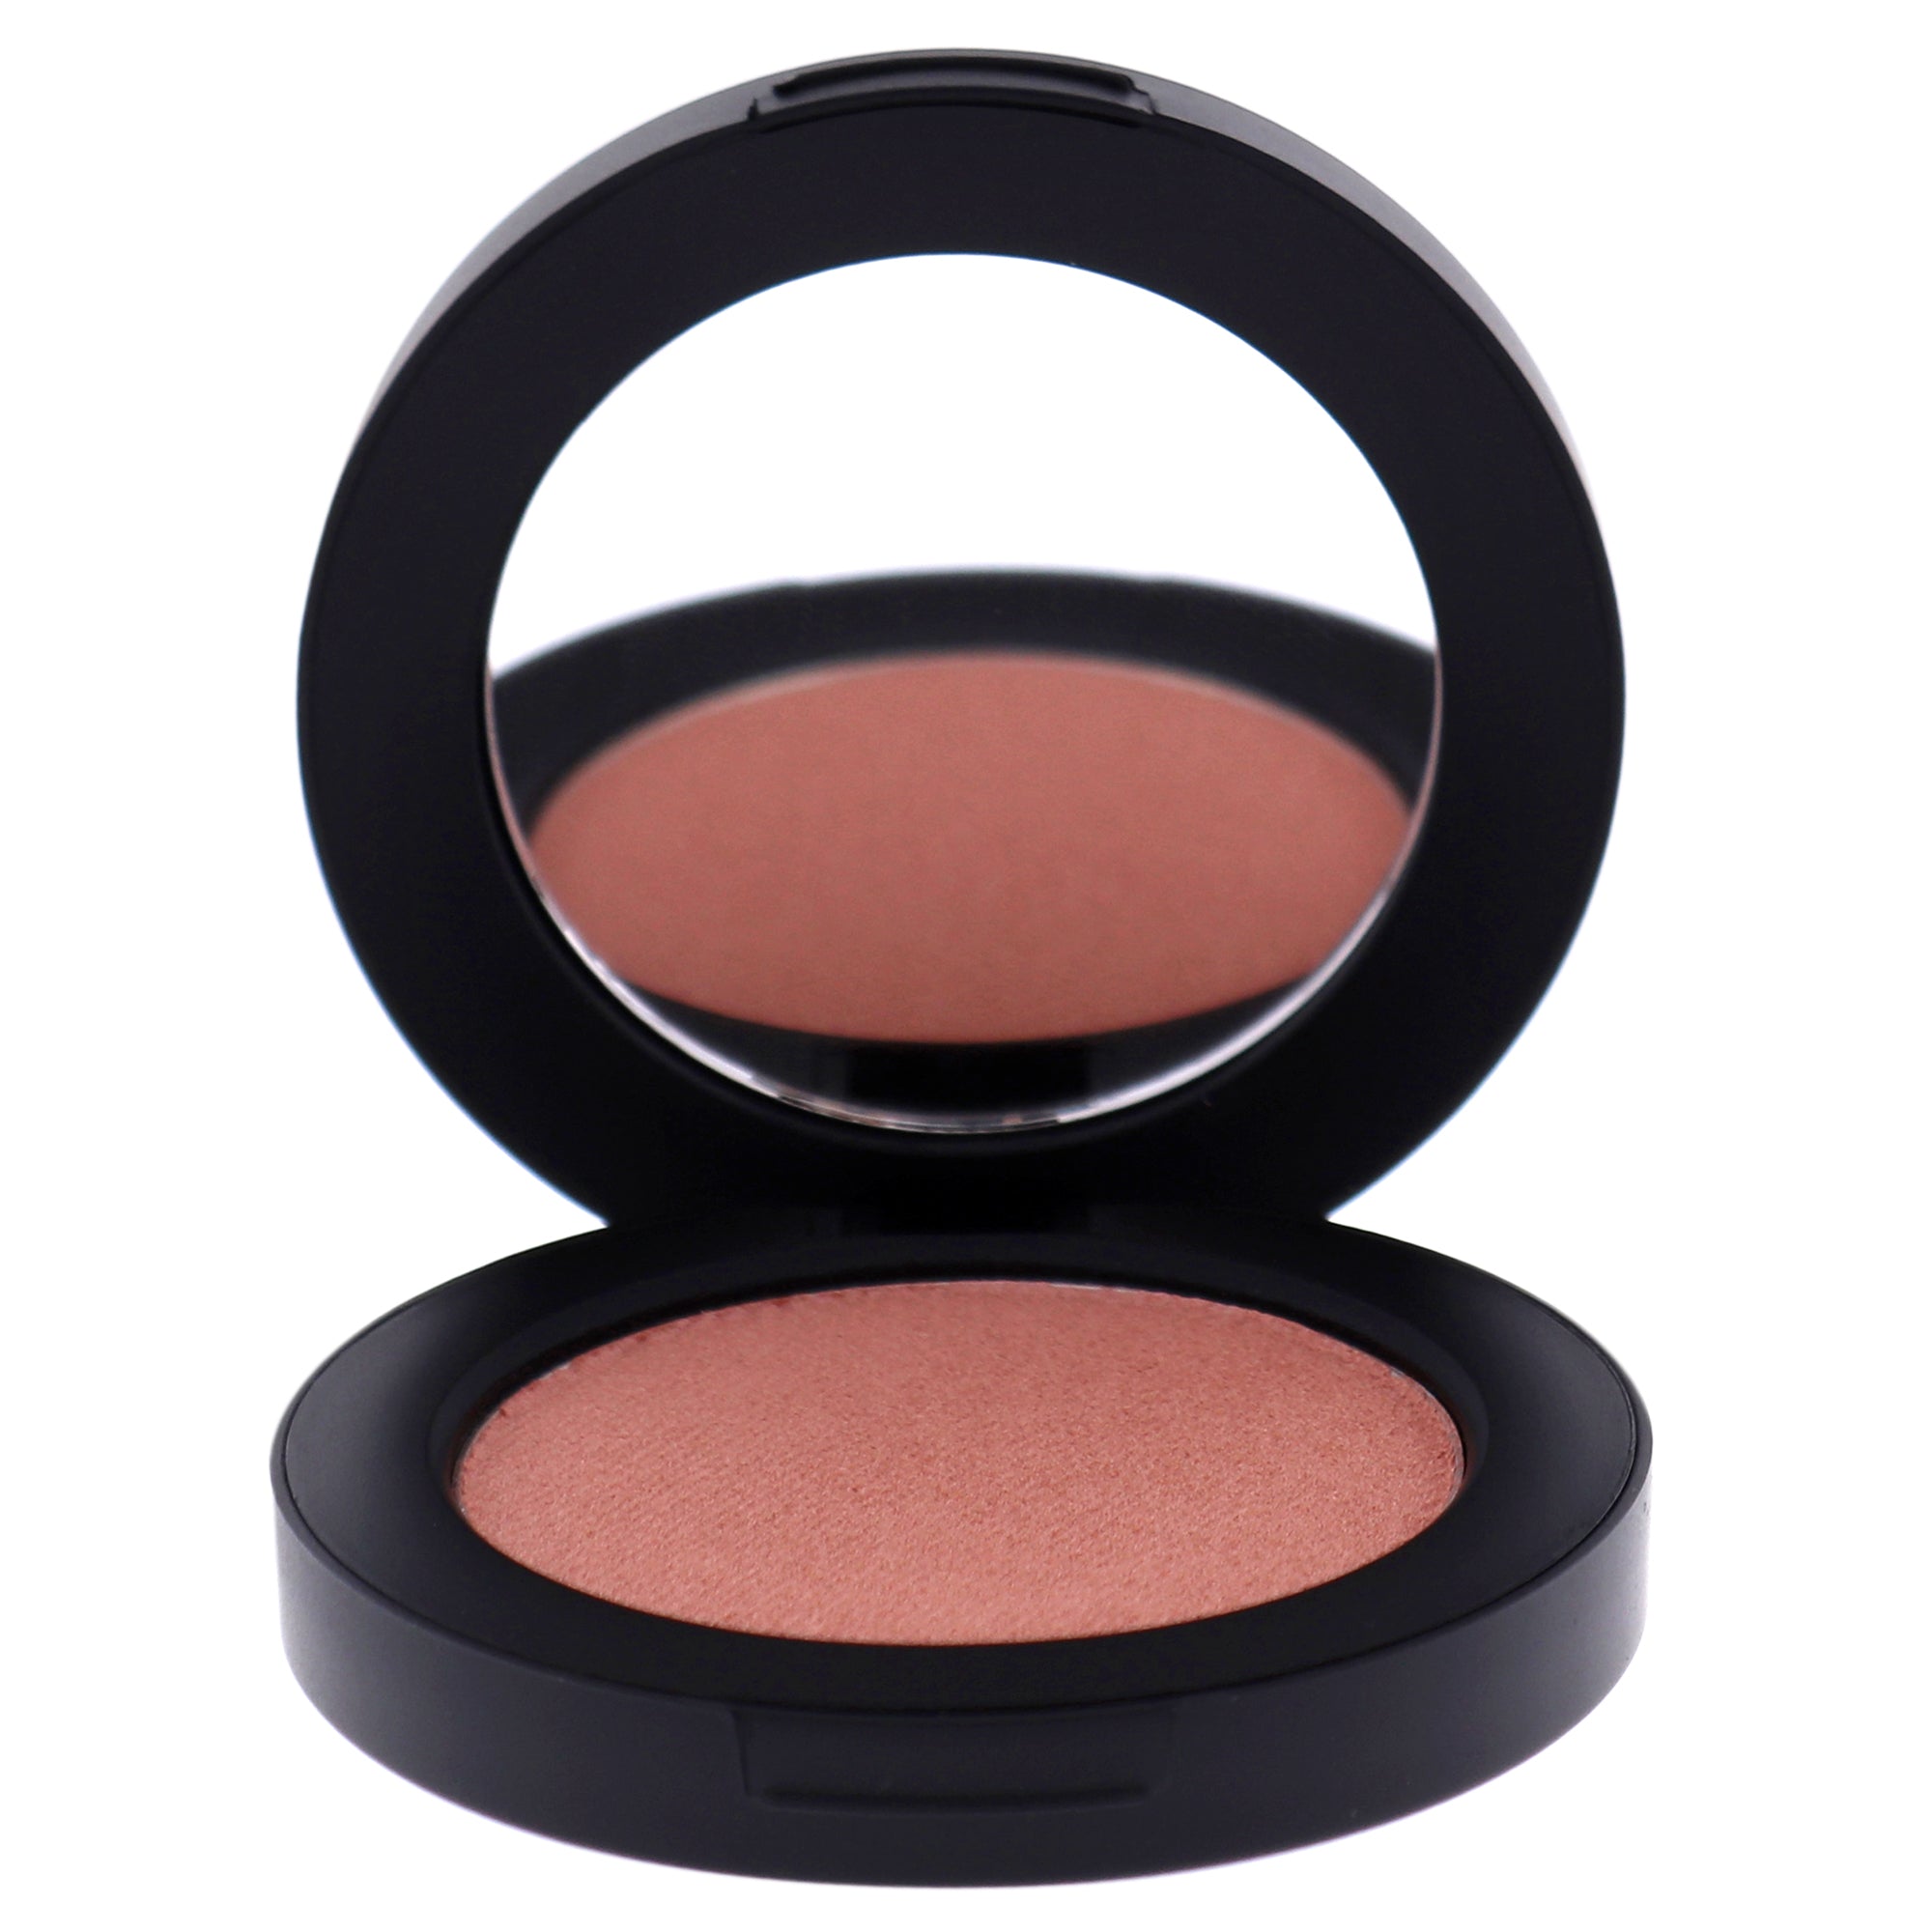 Pressed Mineral Blush - Sugar Plum by Youngblood for Women - 0.10 oz Blush